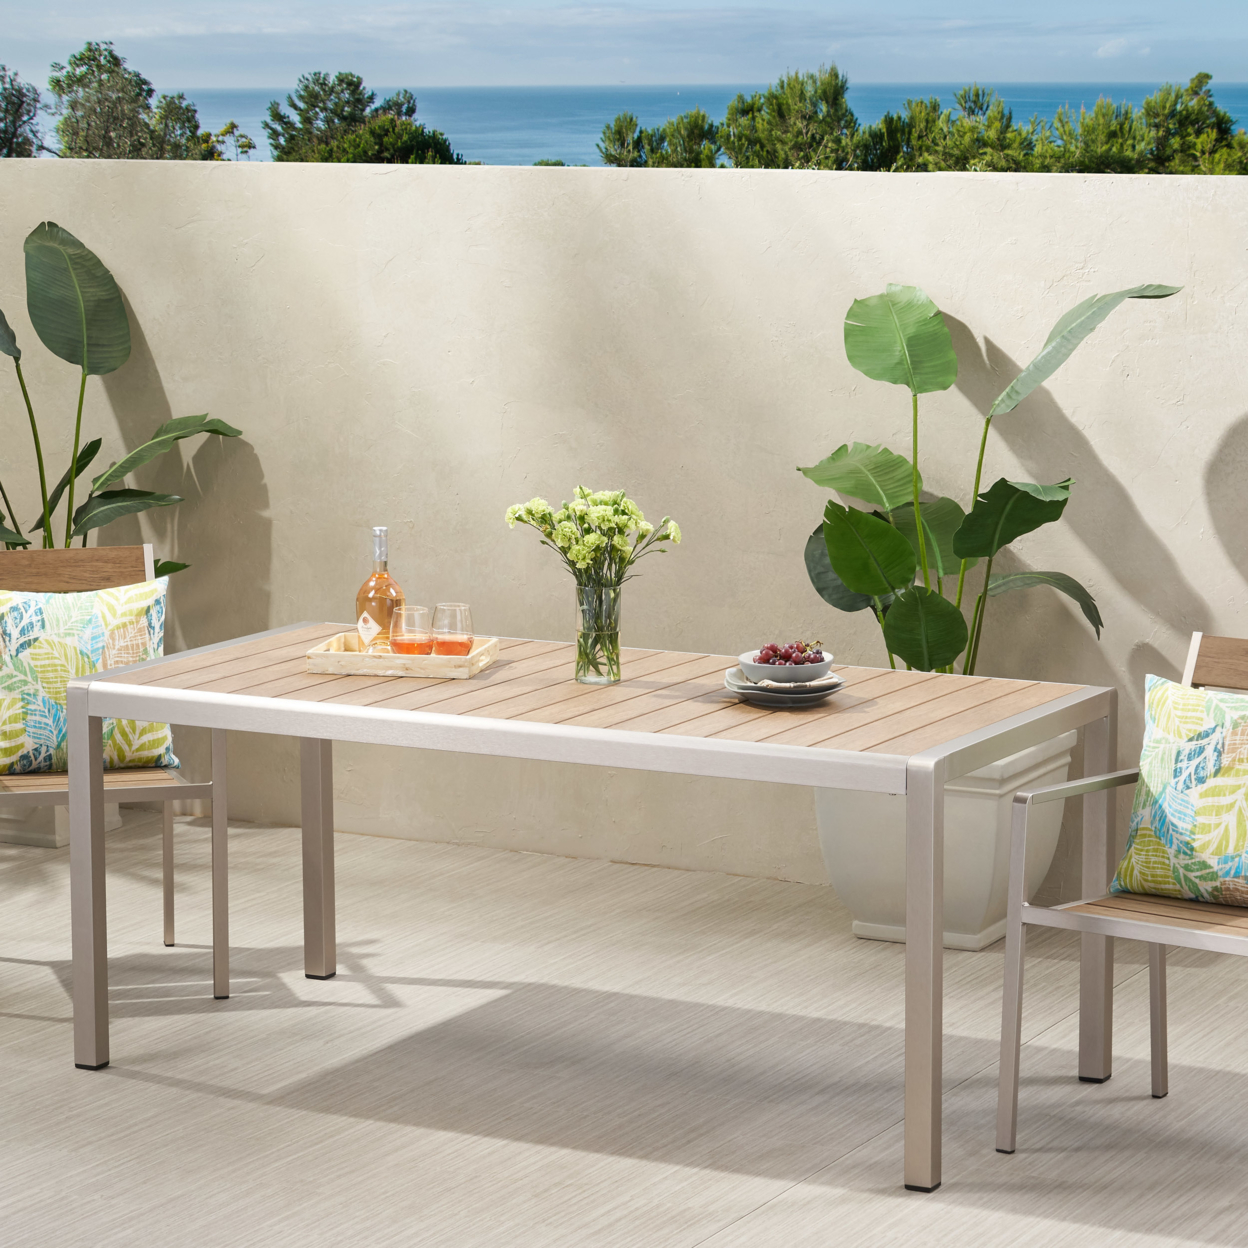 Buy Hannah Outdoor Modern Aluminum Dining Table with Faux Wood Table